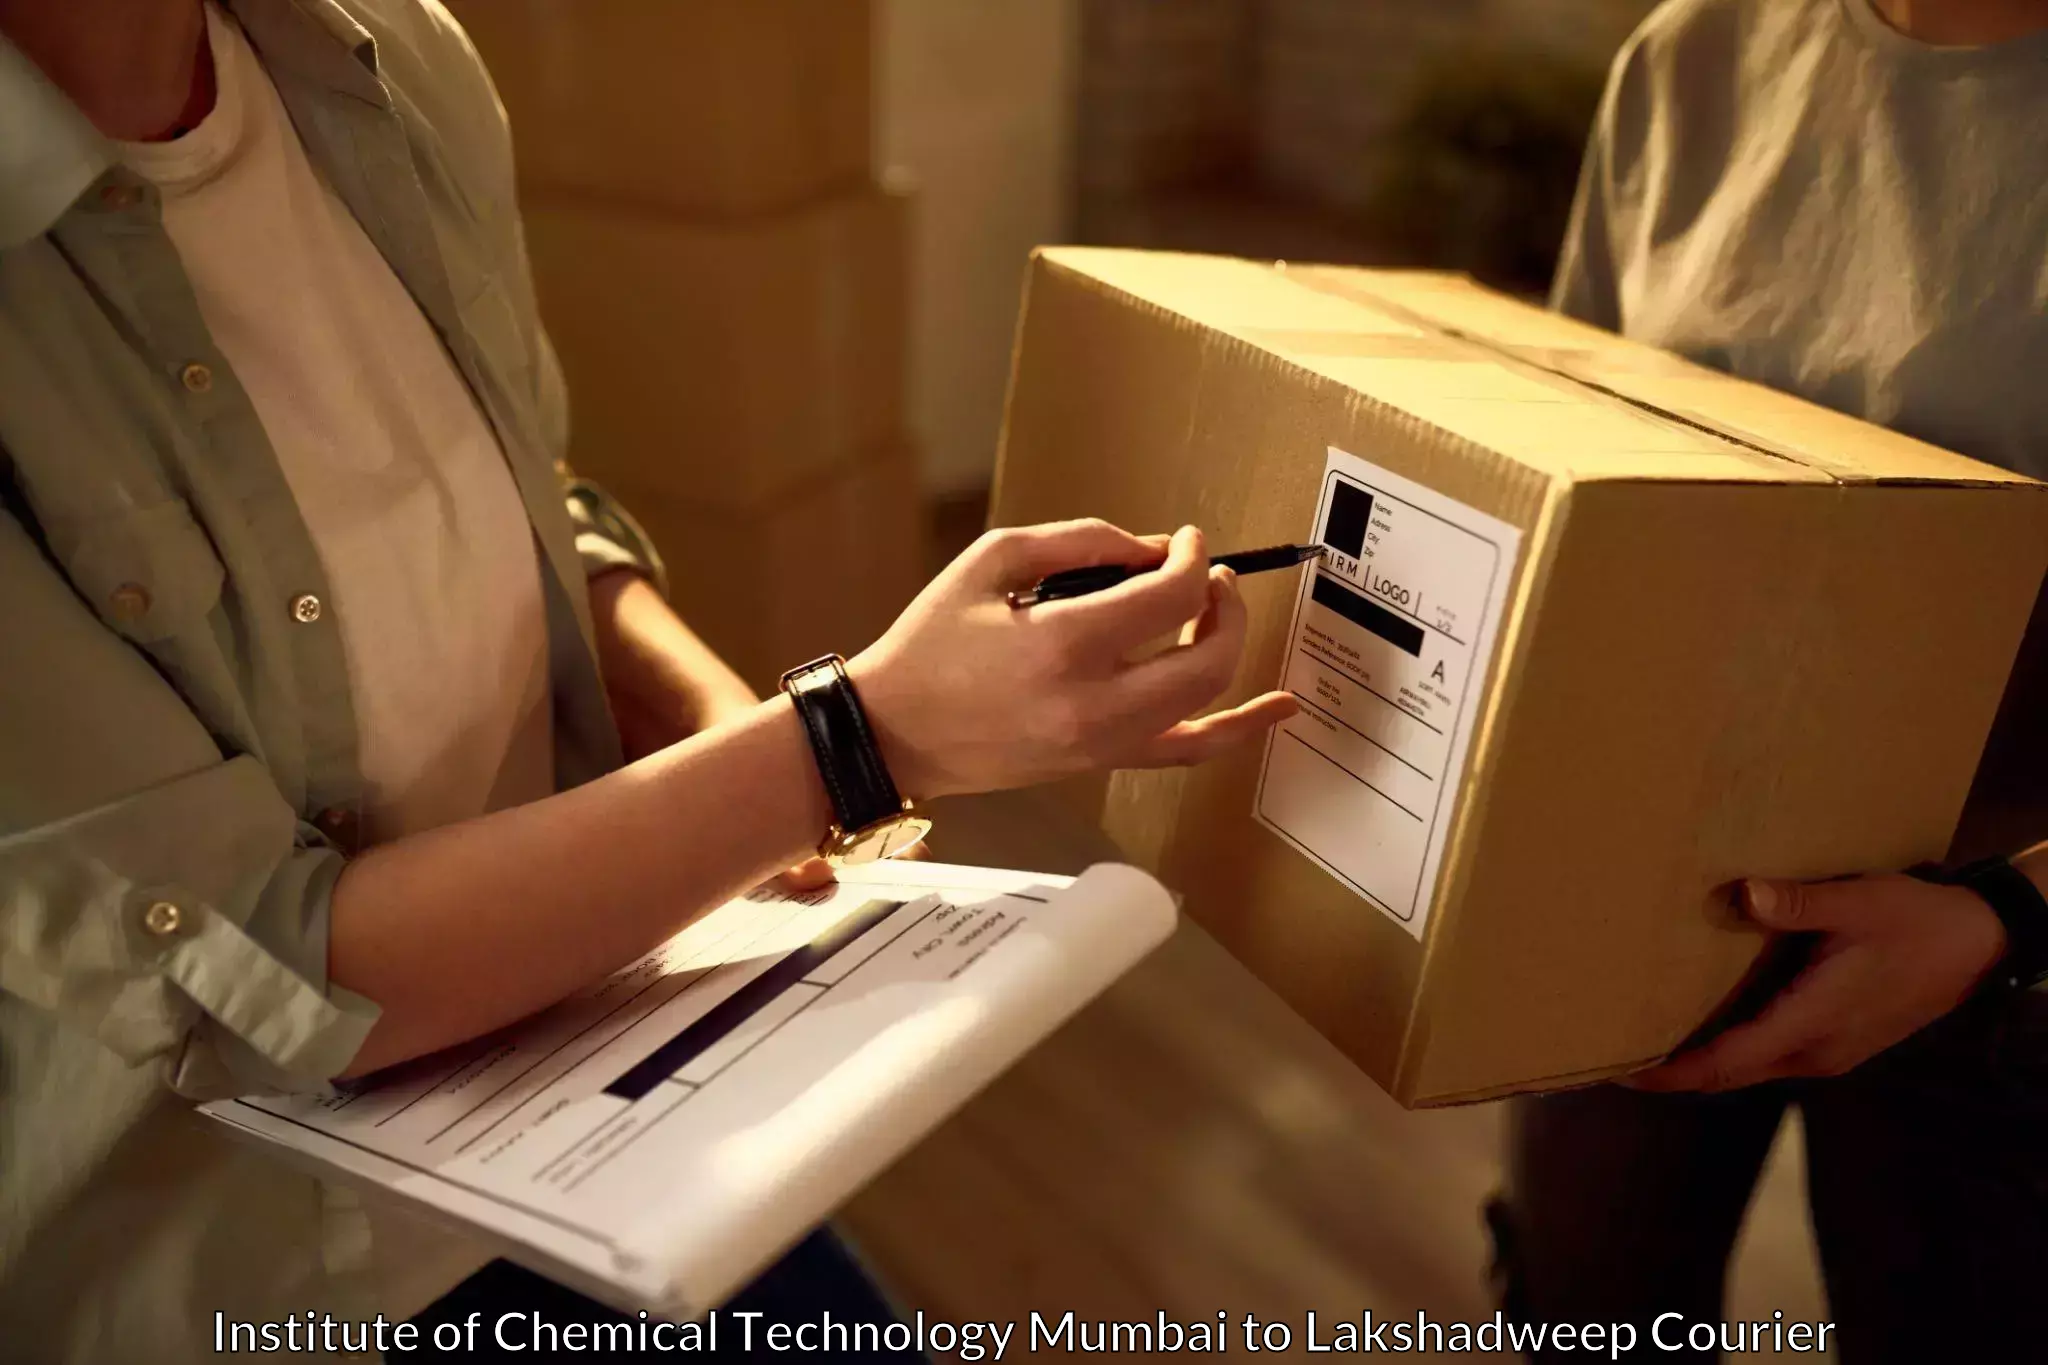 Parcel service for businesses Institute of Chemical Technology Mumbai to Lakshadweep